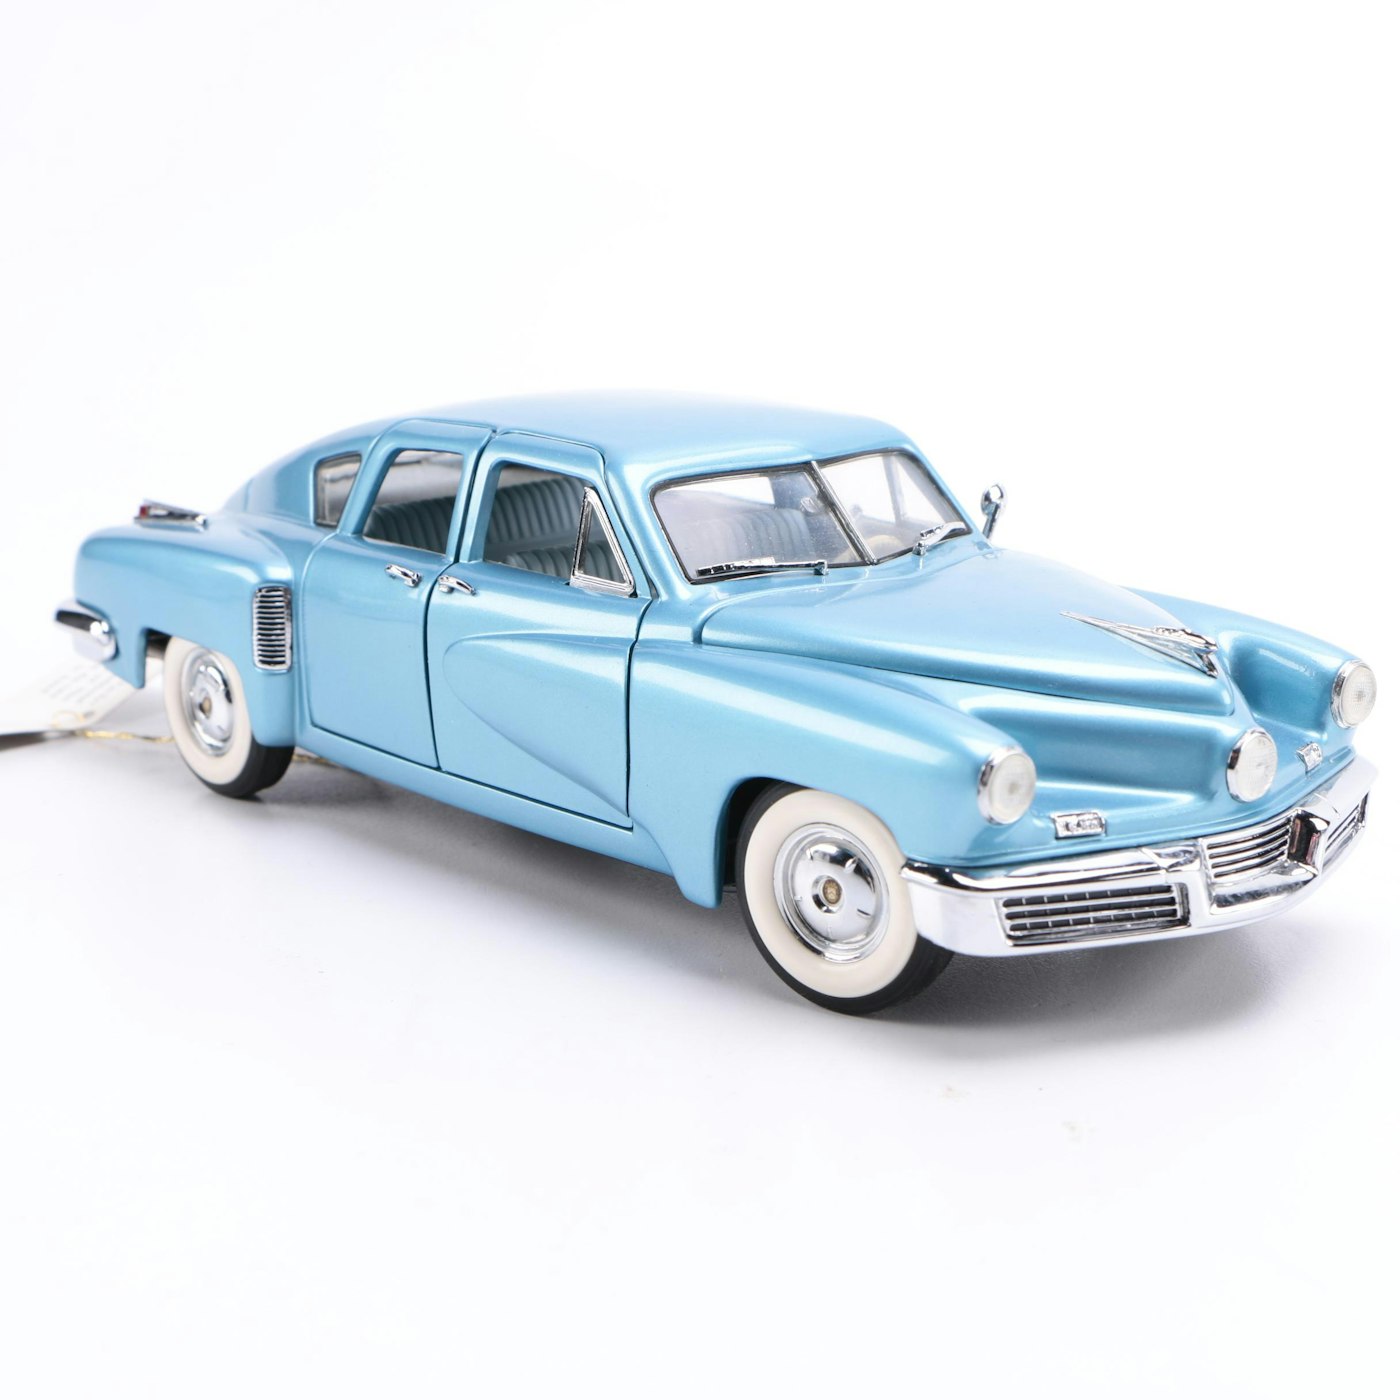 Collection of Franklin Mint 1:24 Scale Die-Cast Classic Cars | EBTH